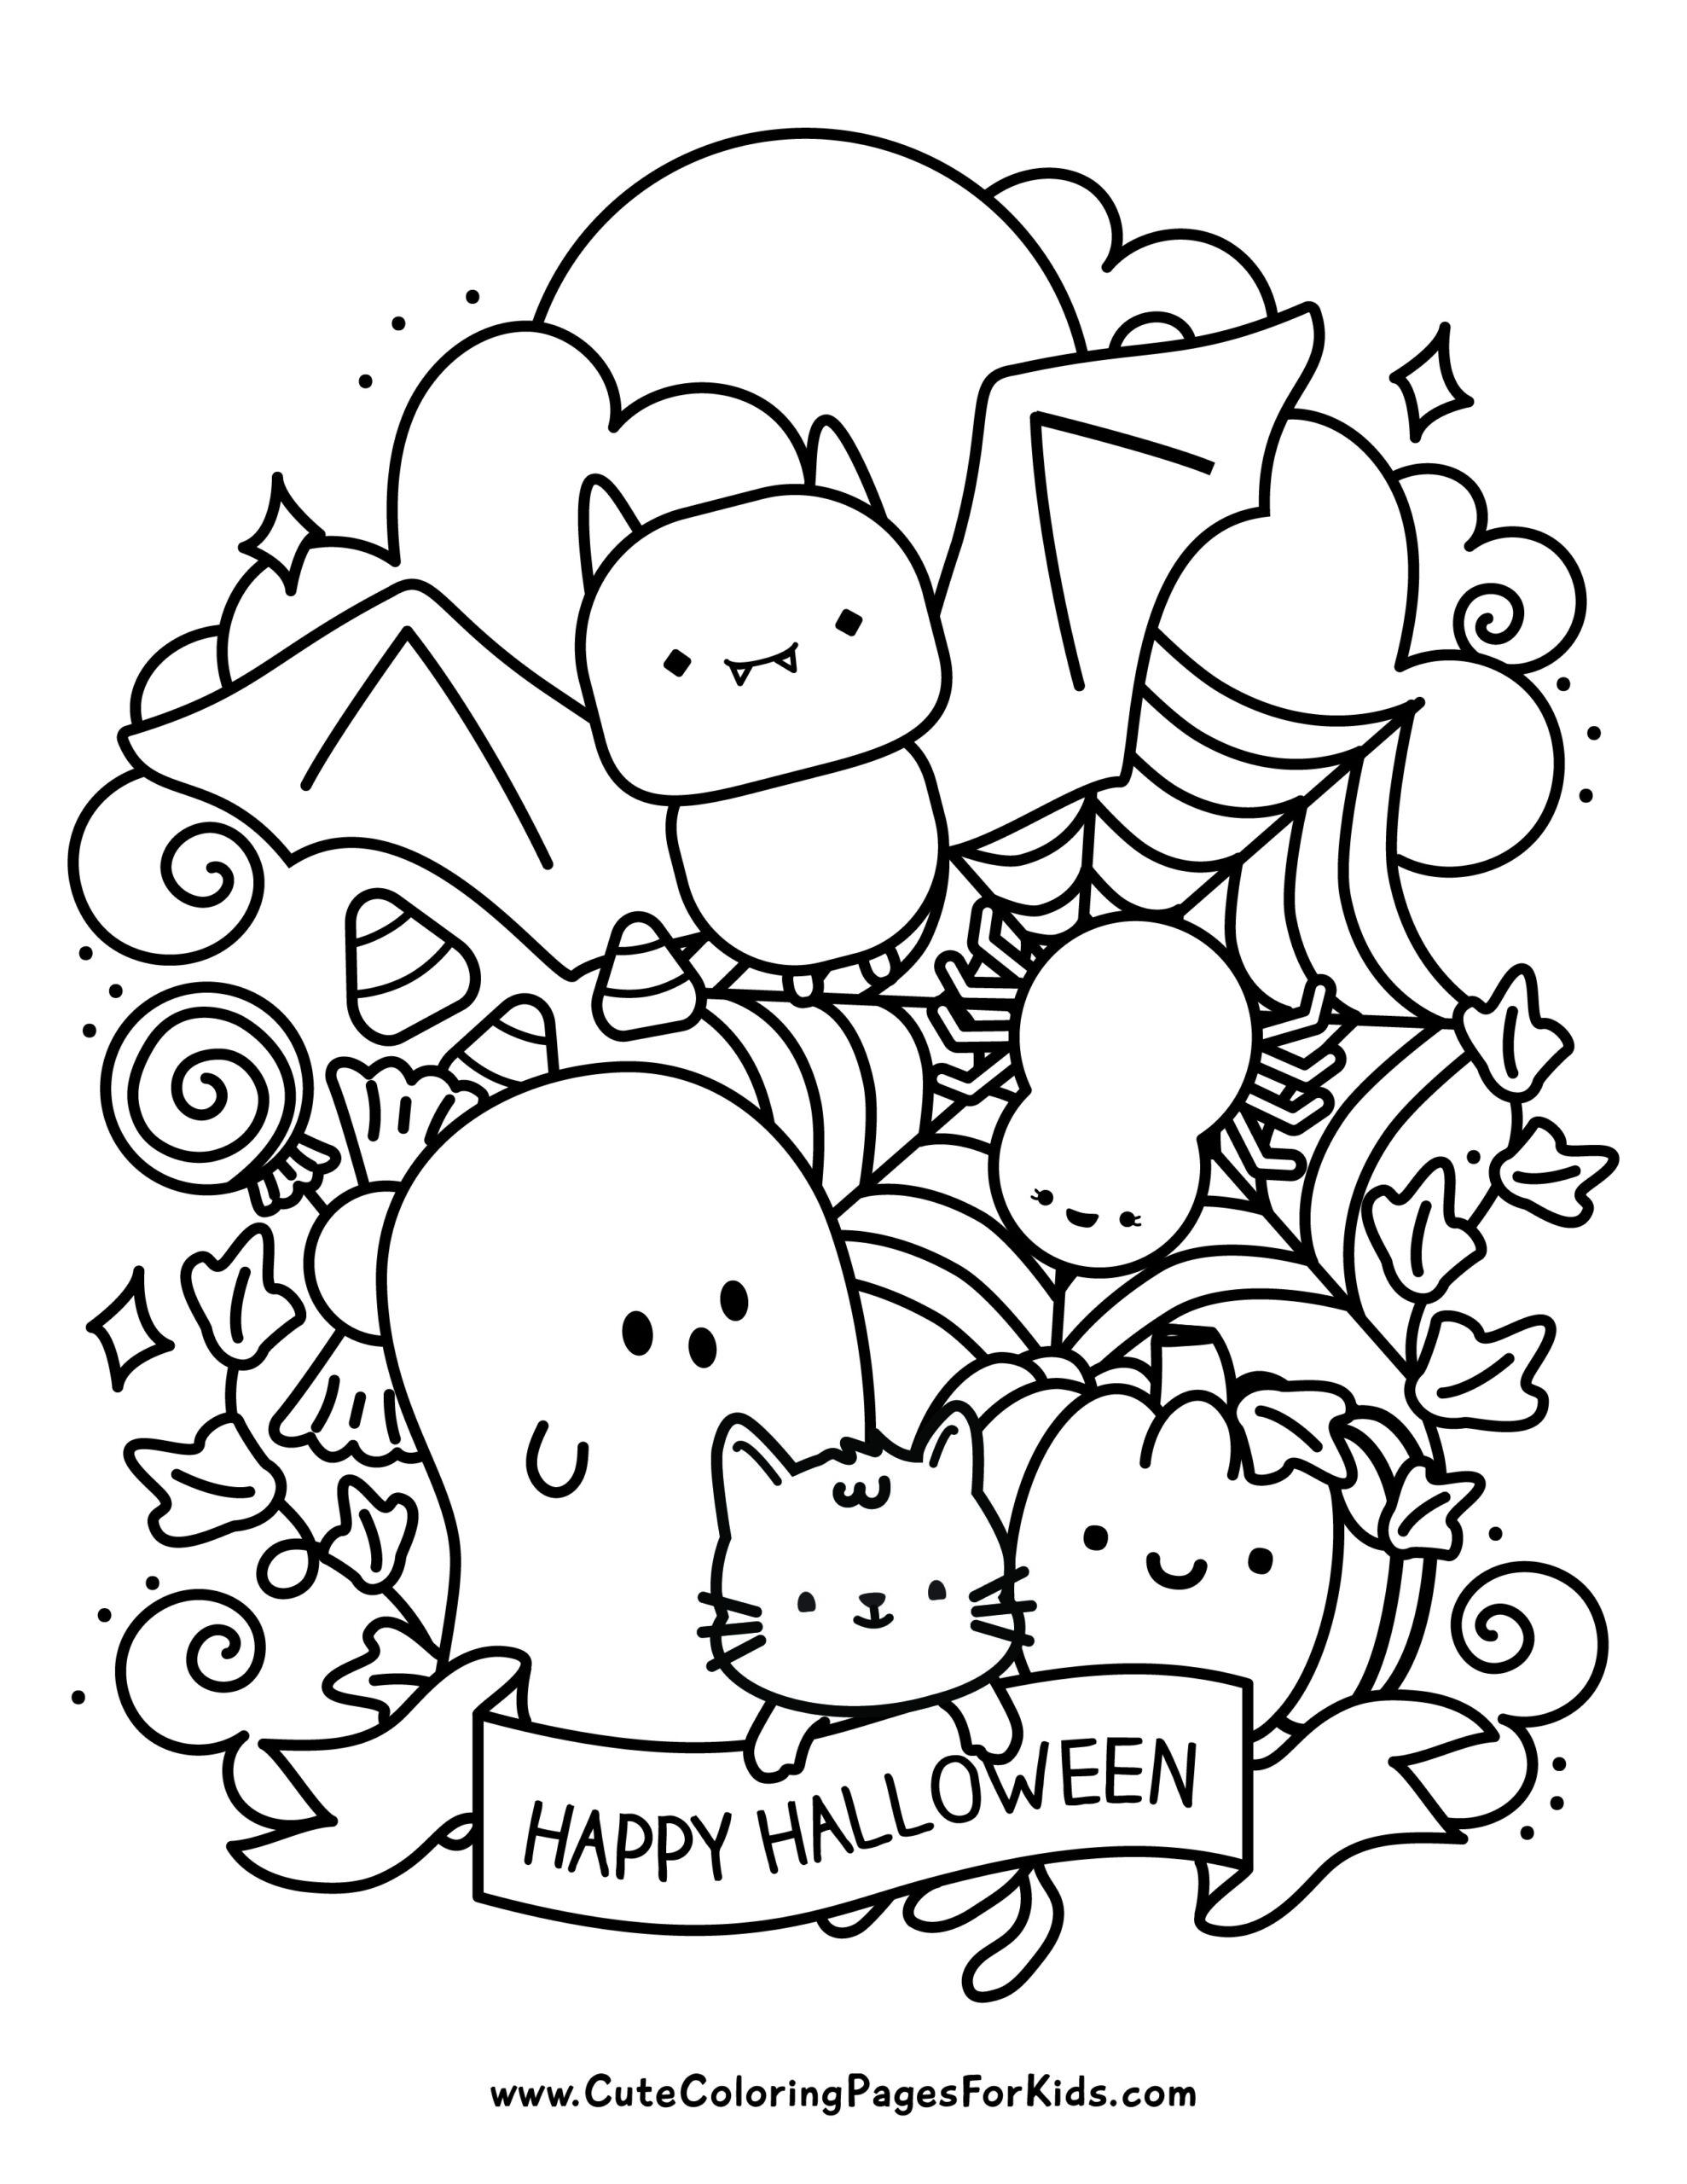 Printable Halloween Coloring Pages: Download All 12 PDFs - Cute ...